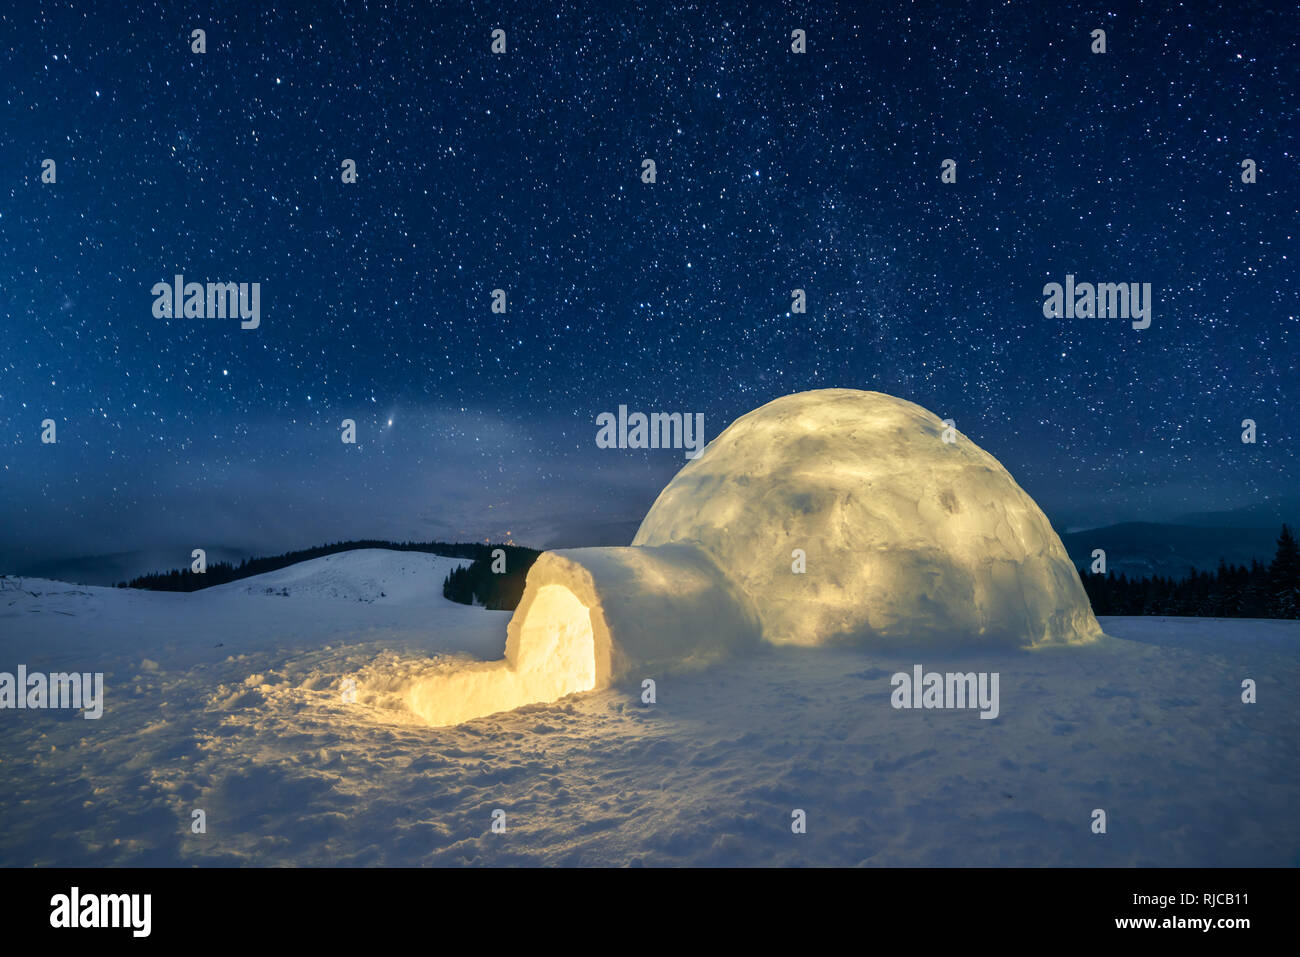 Fantastic winter landscape glowing by star light. Wintry scene with snowy igloo and milky way in night sky Stock Photo